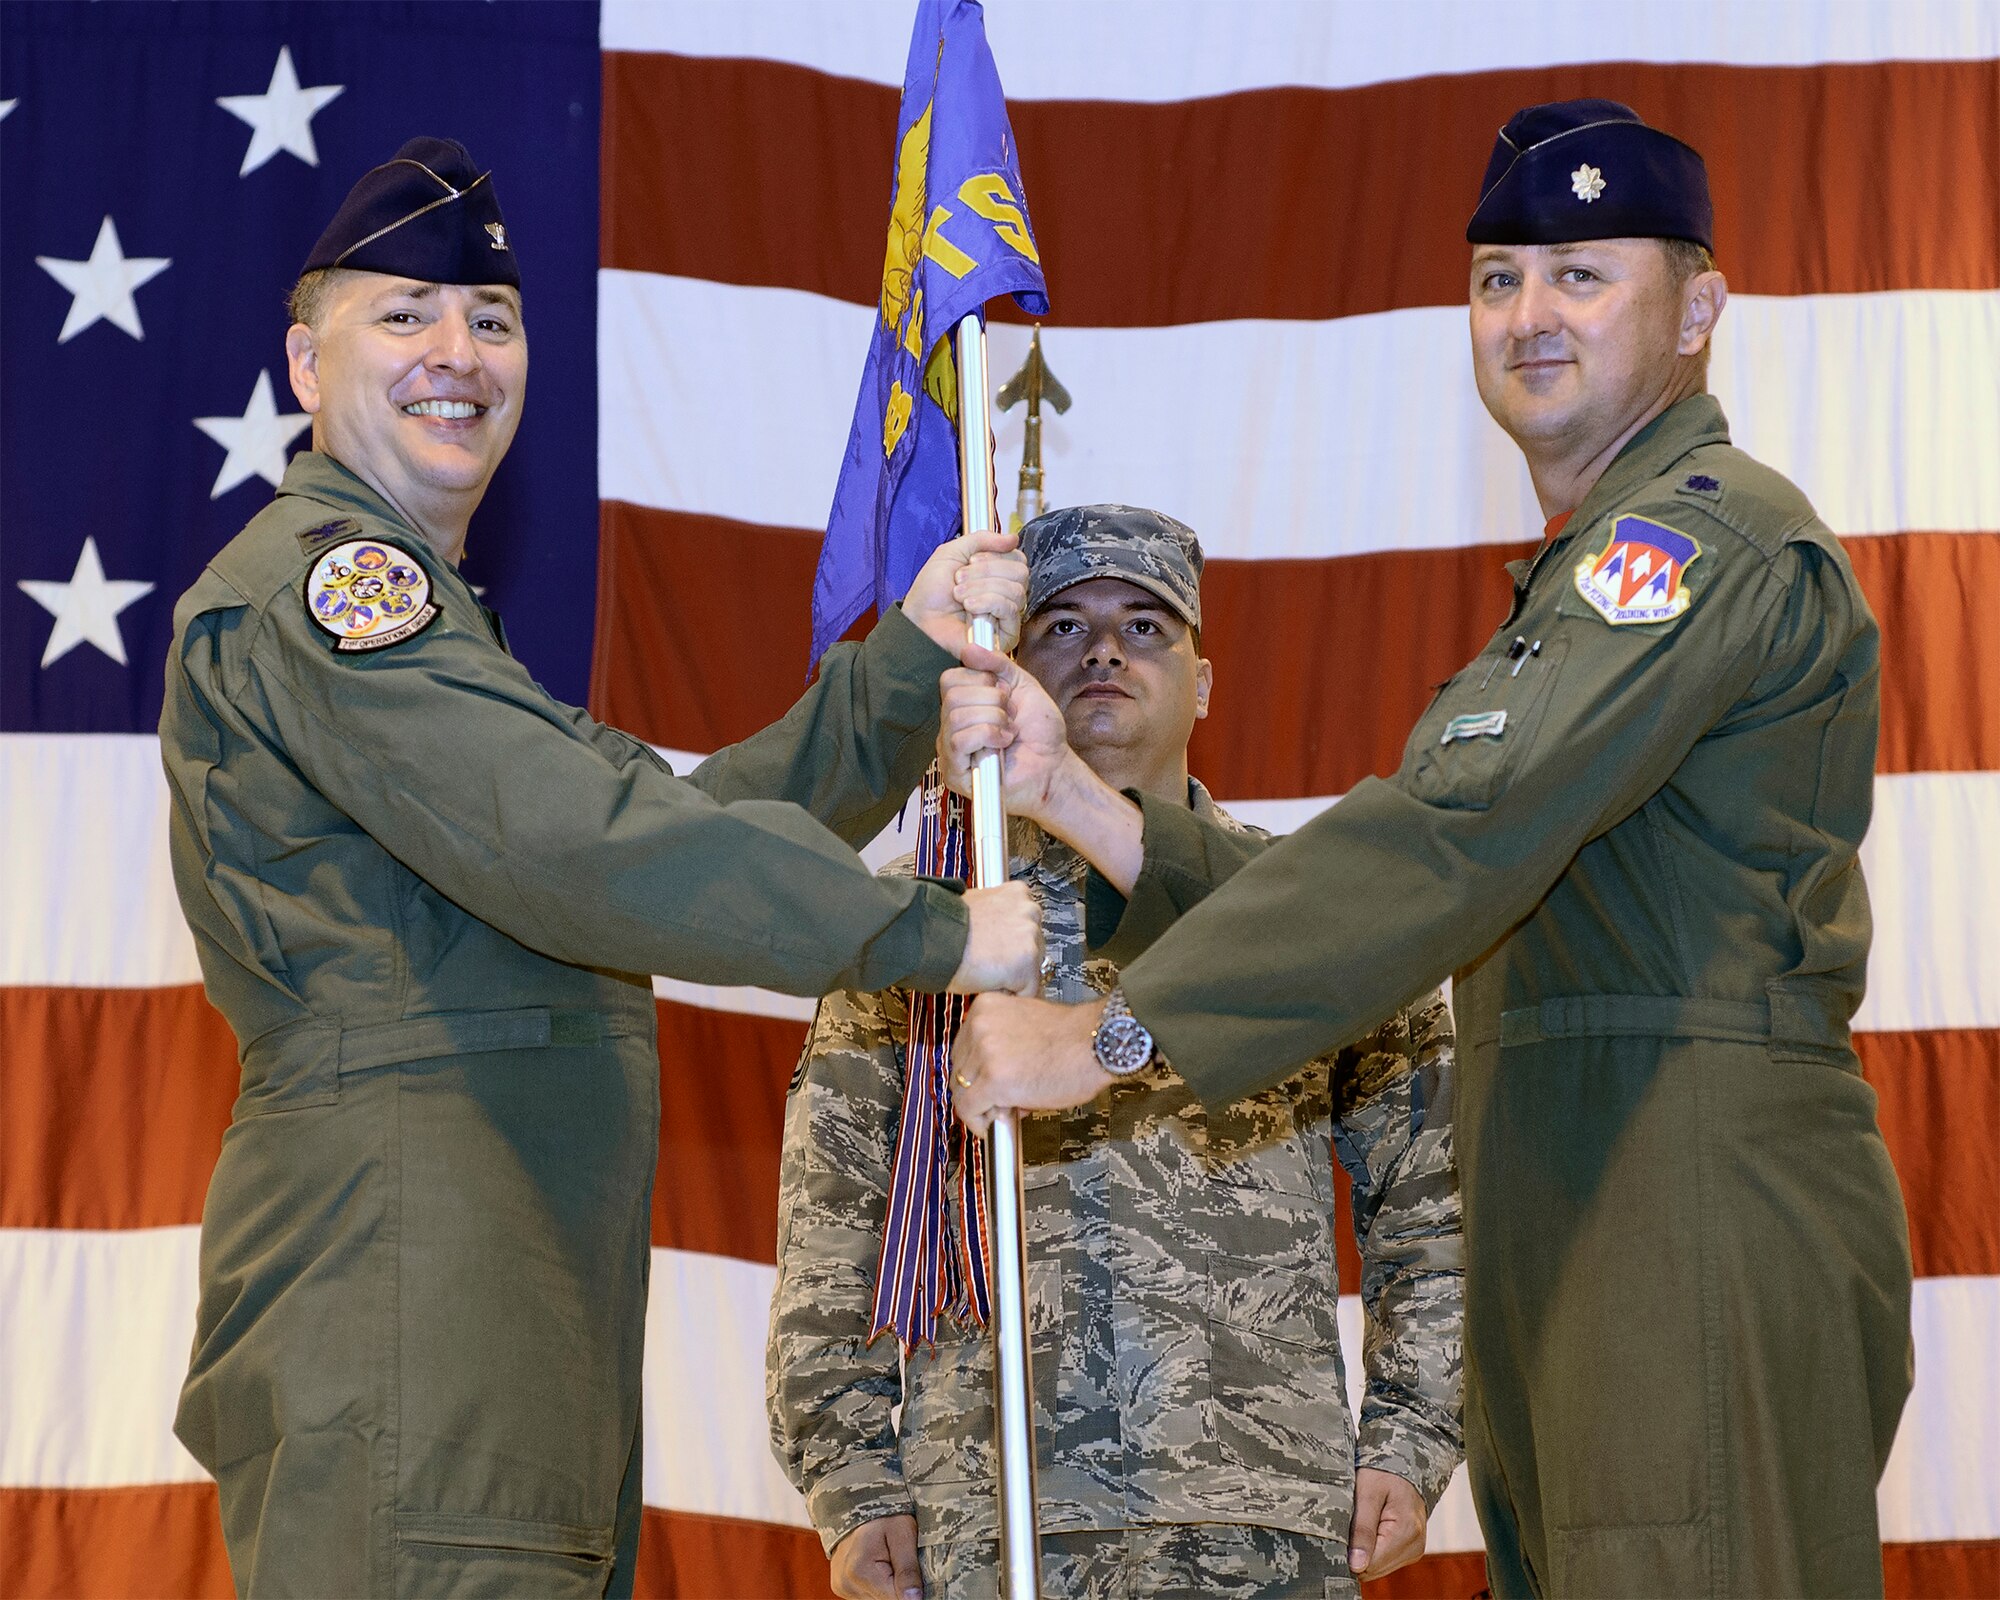 Lt. Col. Bryan Elder accepts the 8th Flying Training Squadron guidon from Col. John Cinnamon, the 71st Operations Group commander, during a change-of-command ceremony June 12 at Vance Air Force Base, Oklahoma. Elder assumed command from Lt. Col. Troy Henderson. (U.S. Air Force photo / David Poe)